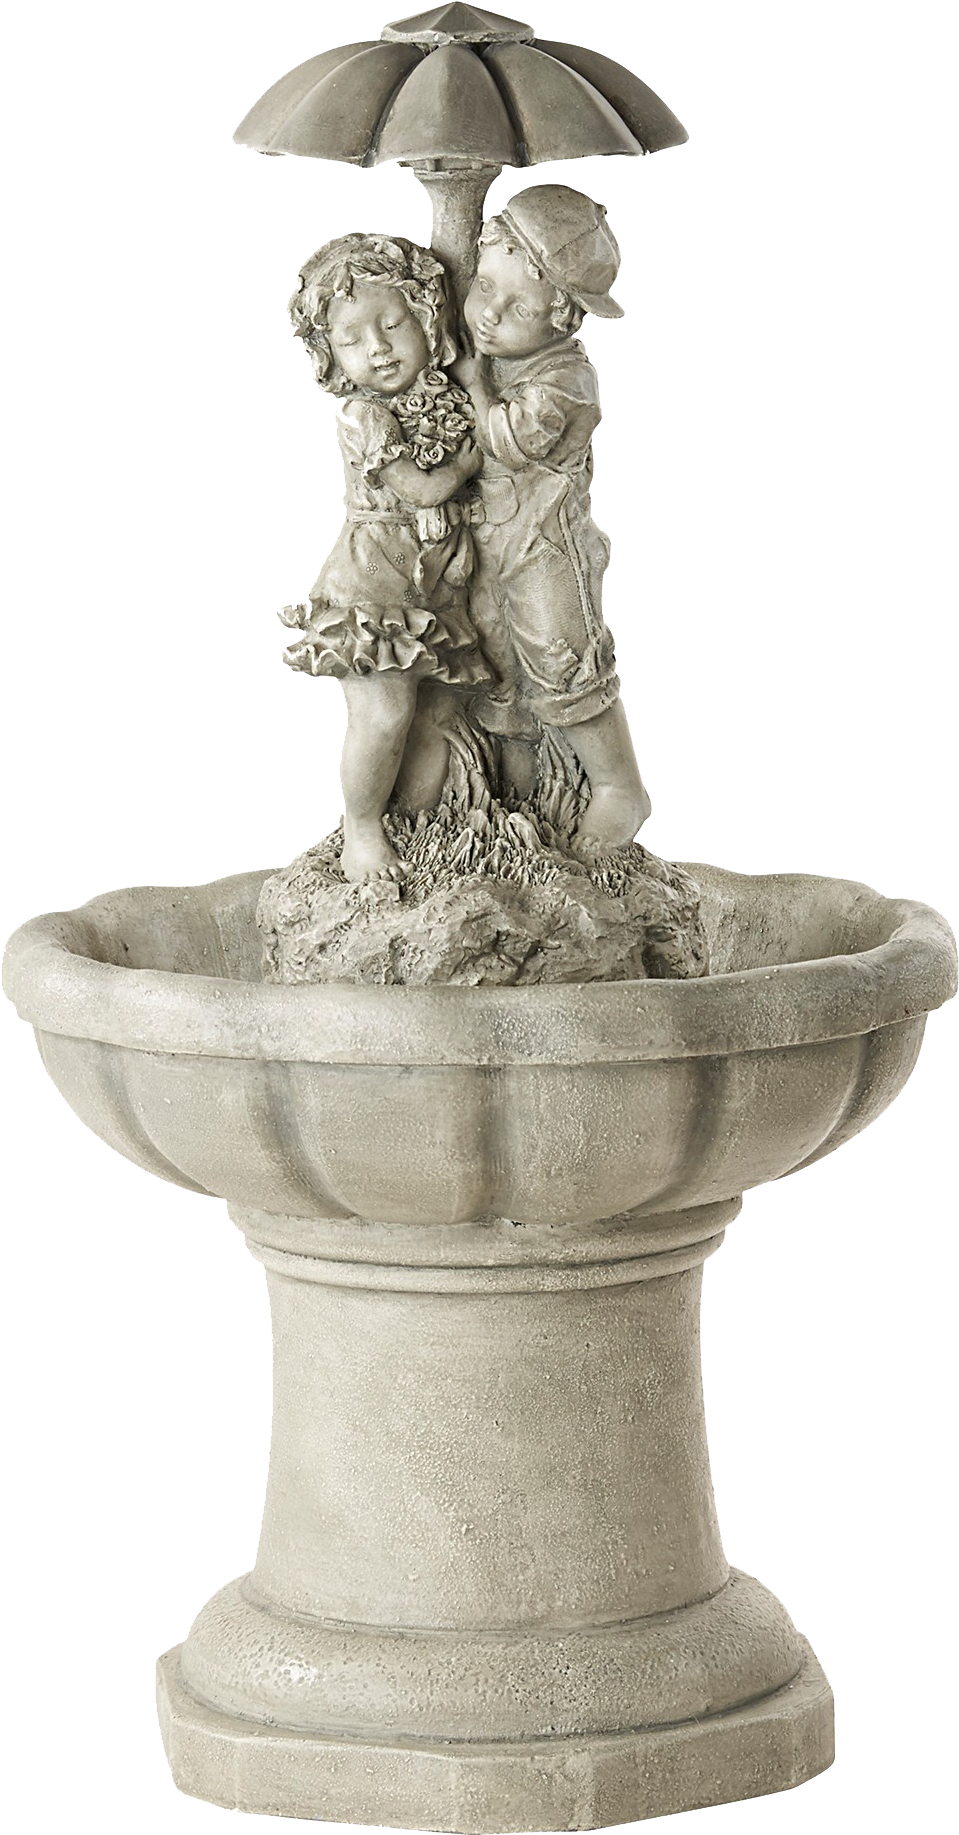 A Statue Of A Boy And Girl In A Bird Bath